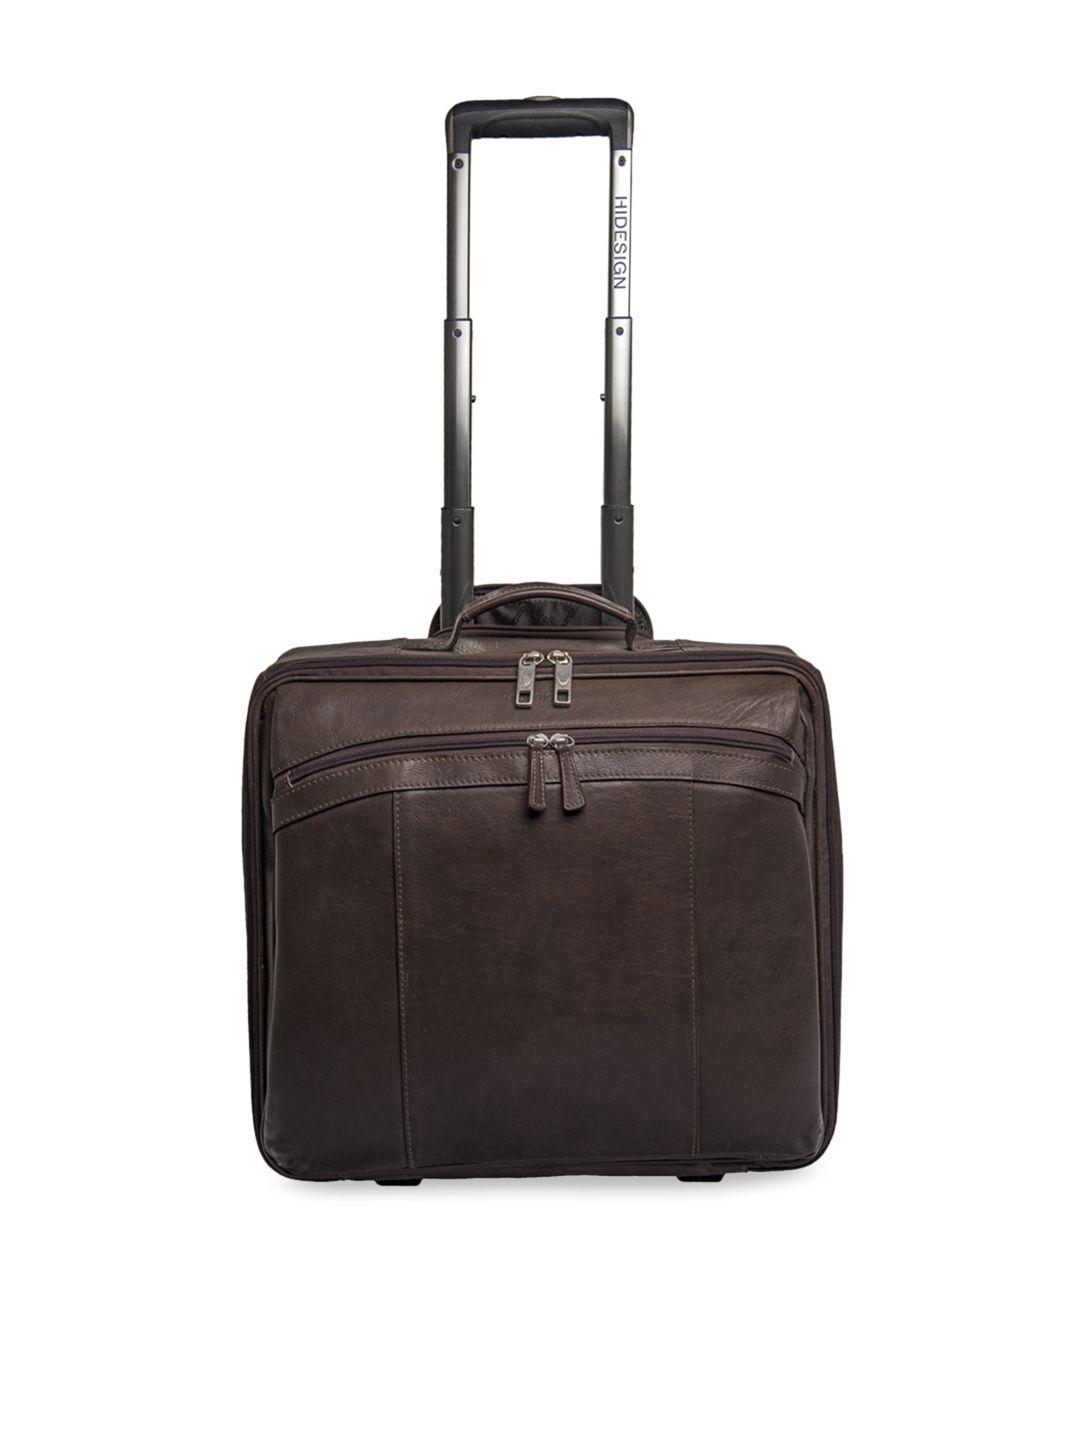 hidesign unisex coffee brown solid leather cabin trolley suitcase